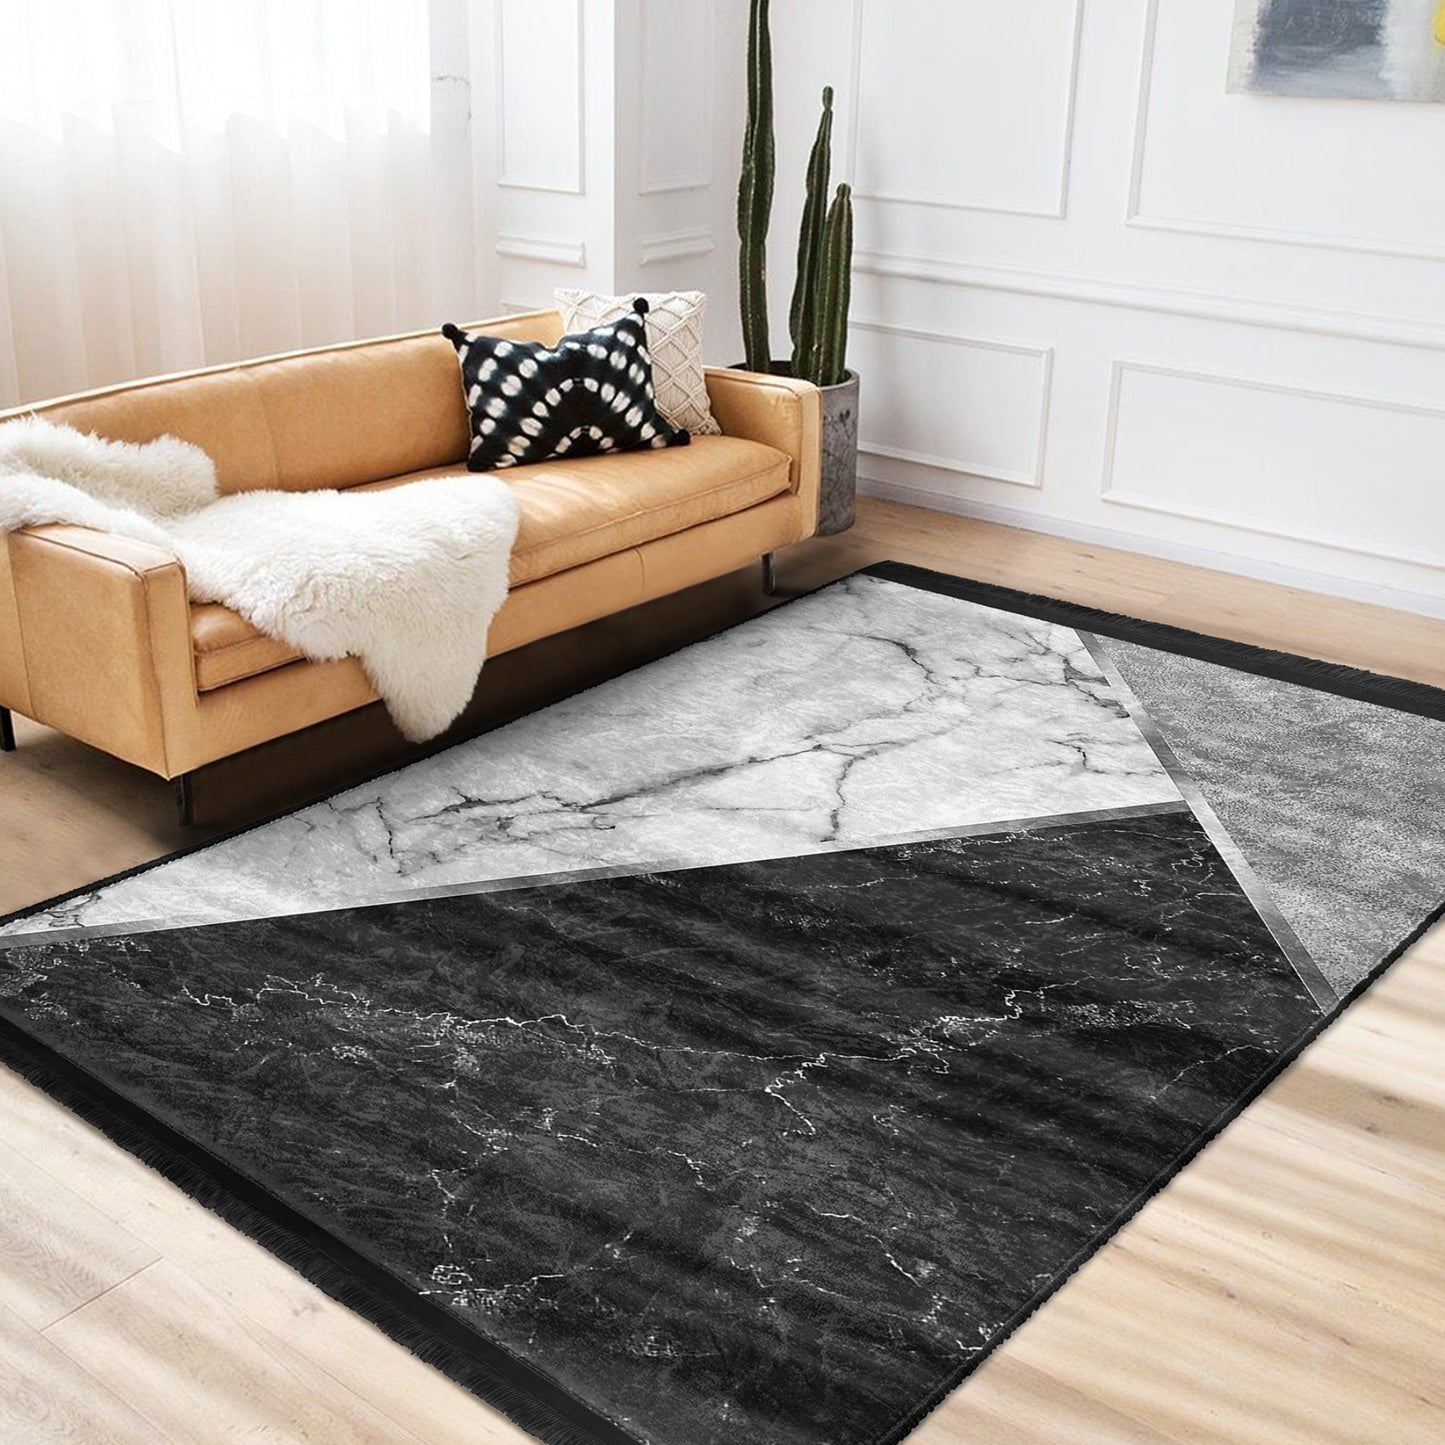 Black White Marble Patterned Area Rug for a Touch of Modern Sophistication